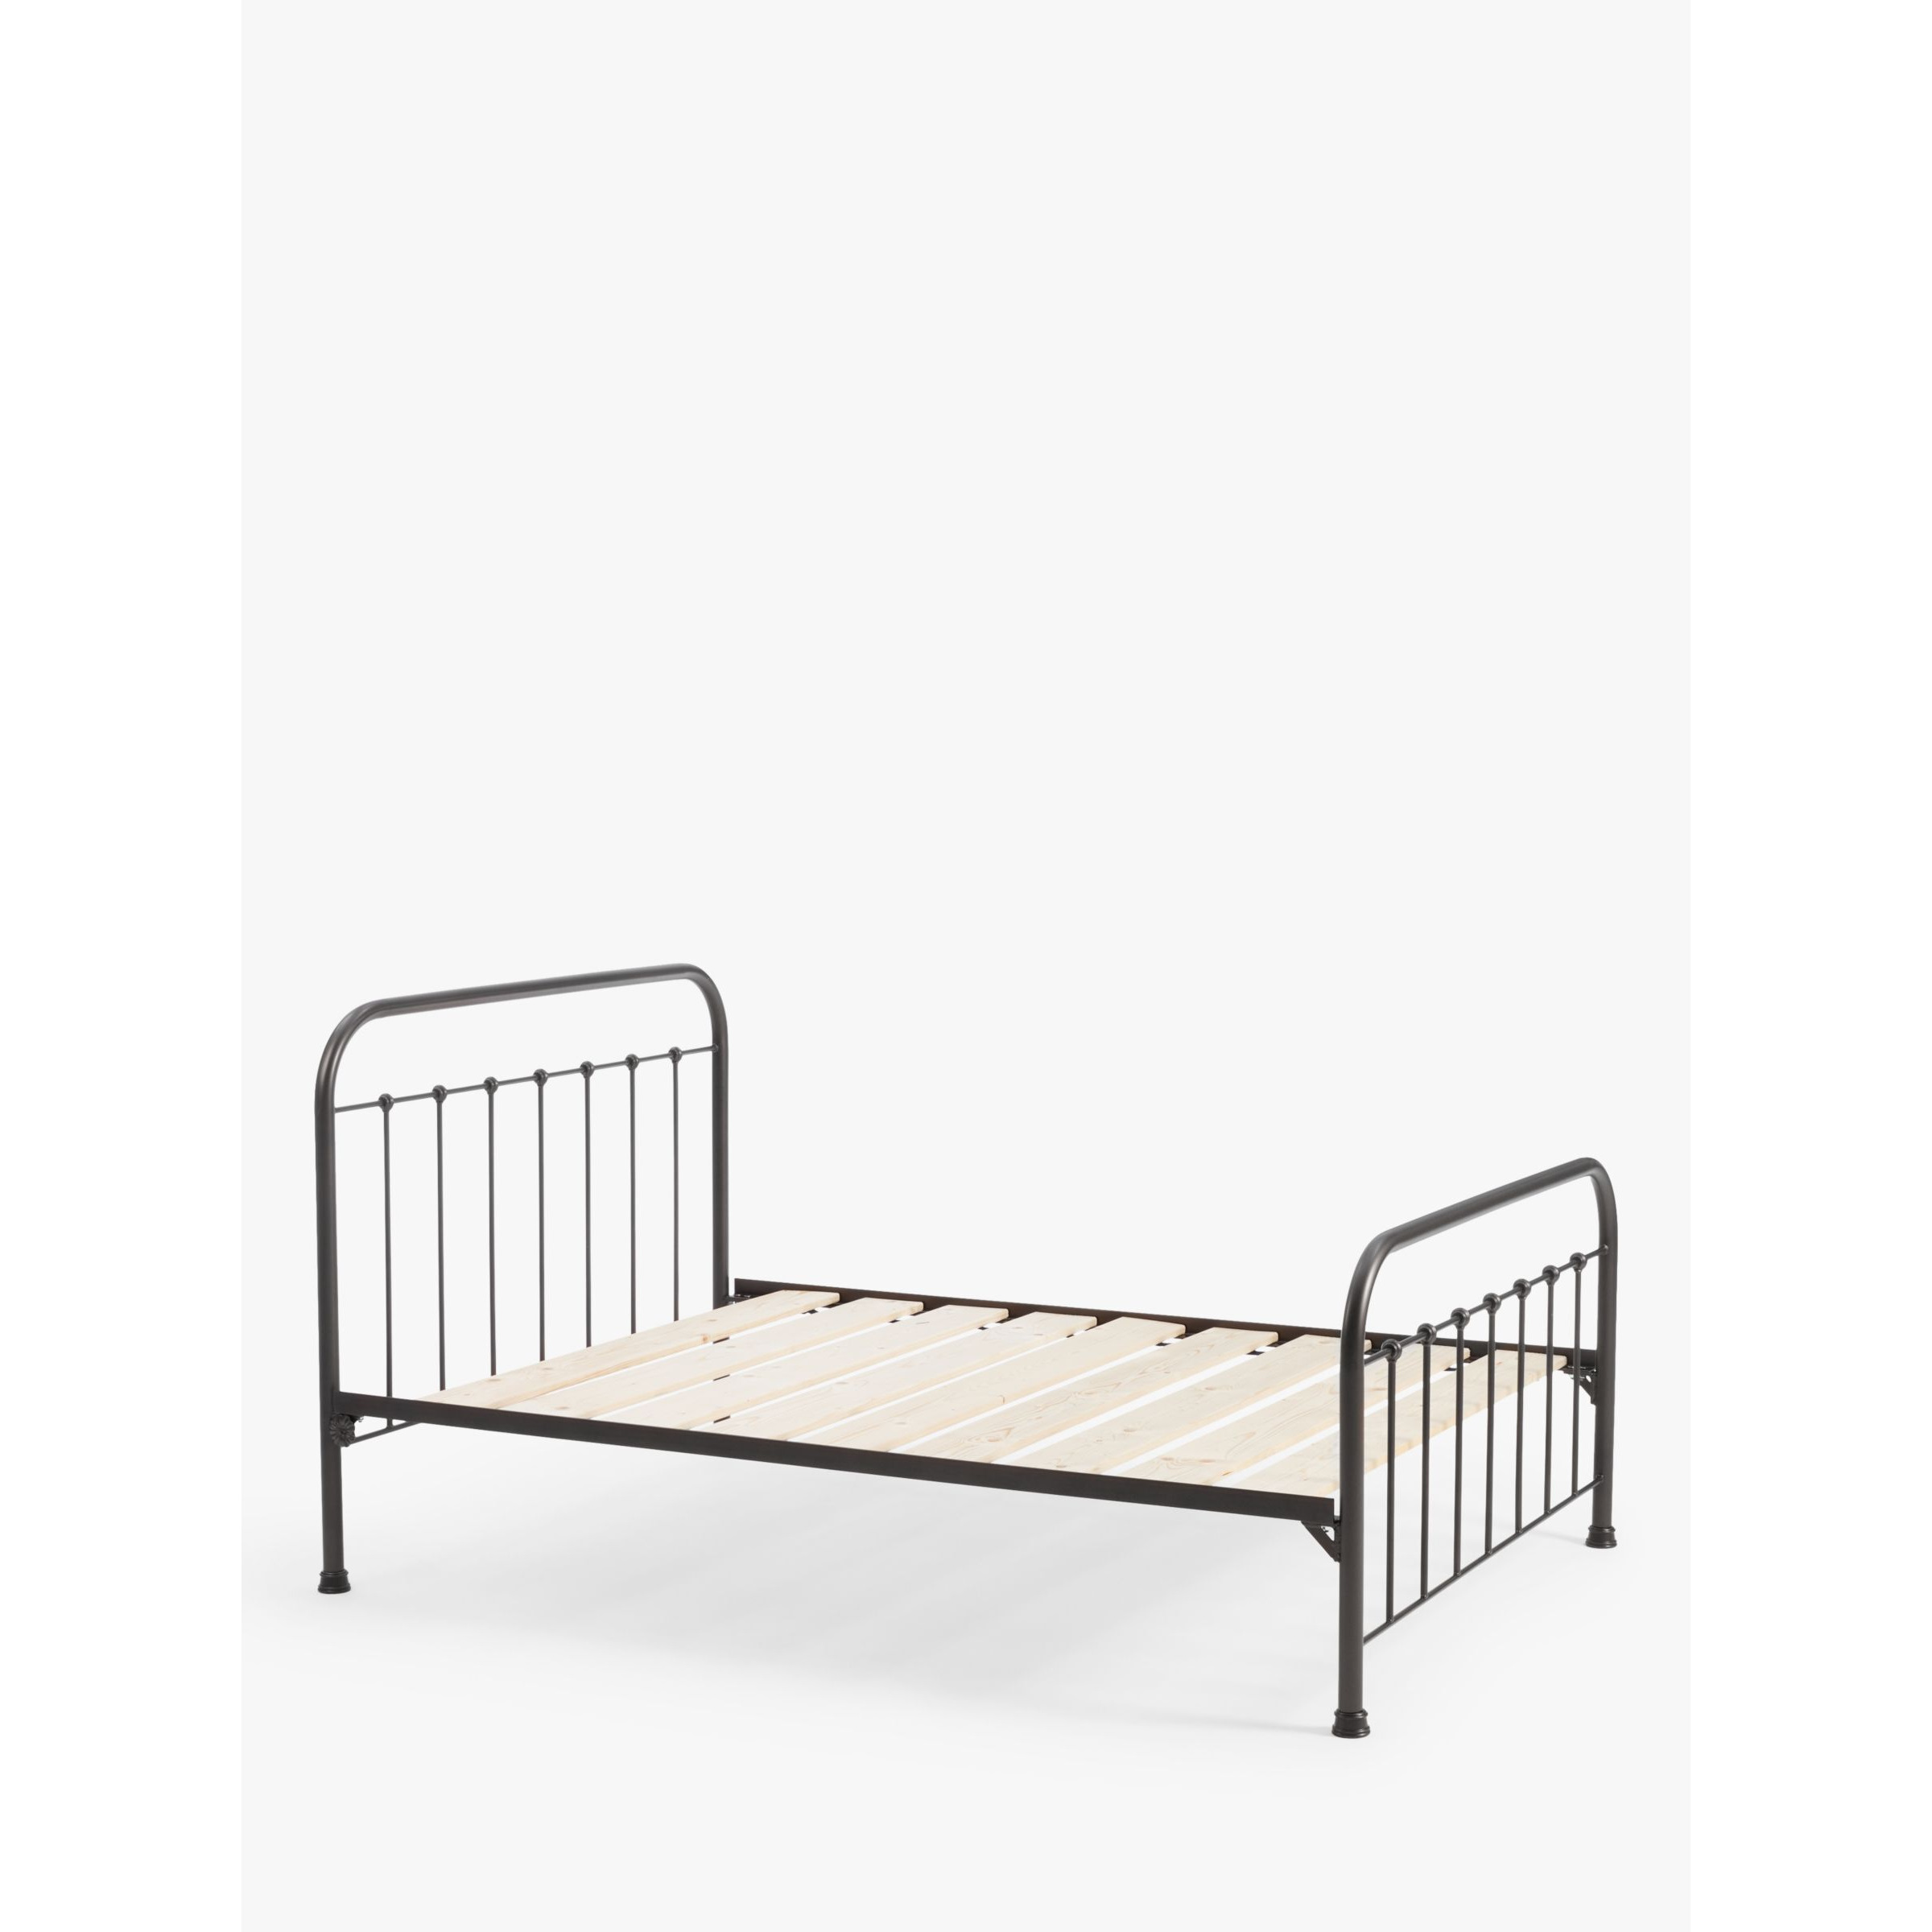 Wrought Iron And Brass Bed Co. Edward Iron Bed Frame, Double, Bronze - image 1